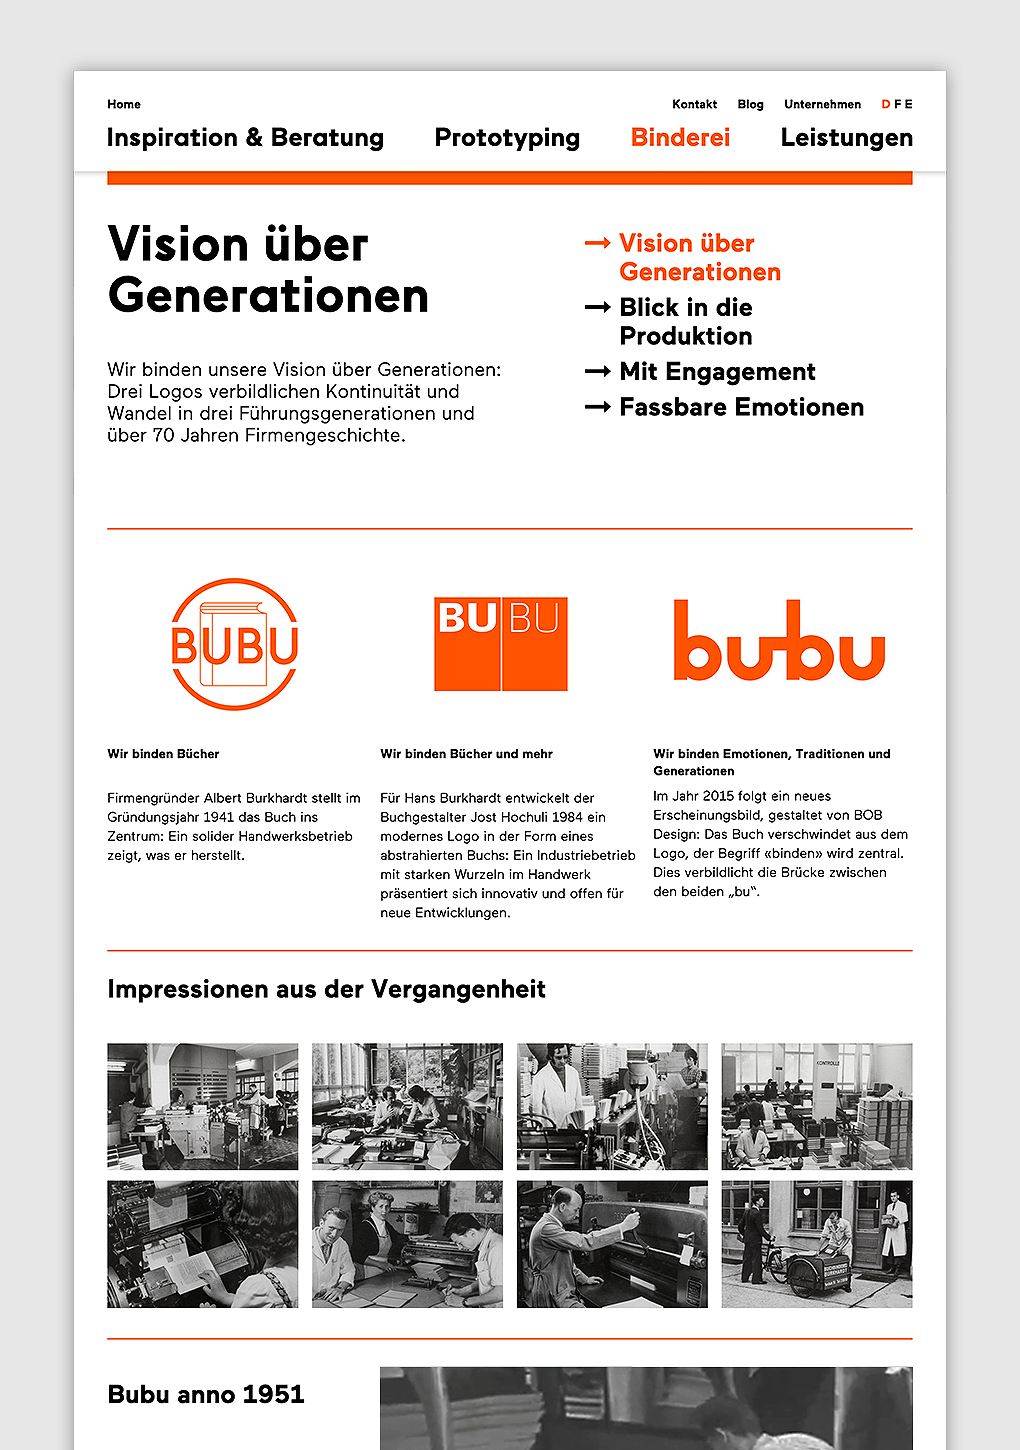 Brand identity and website for Swiss binding specialists Bubu by graphic design studio Bob Design